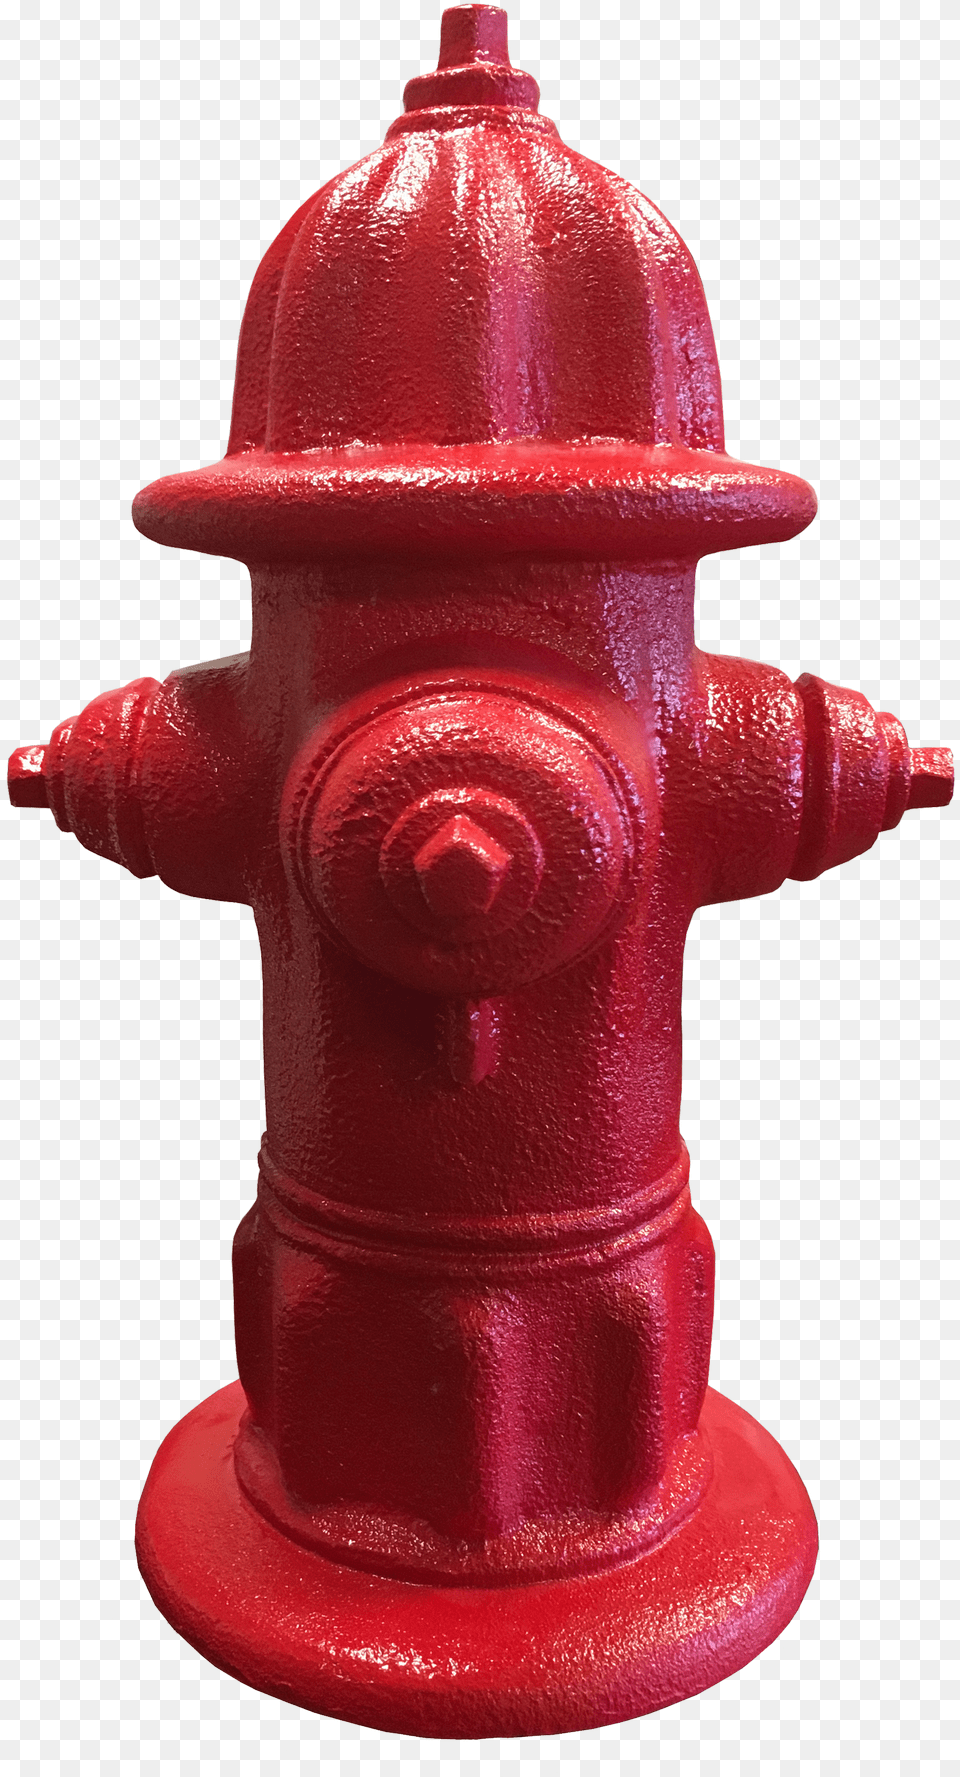 Fire Hydrant Image Fire Hydrant, Fire Hydrant Free Png